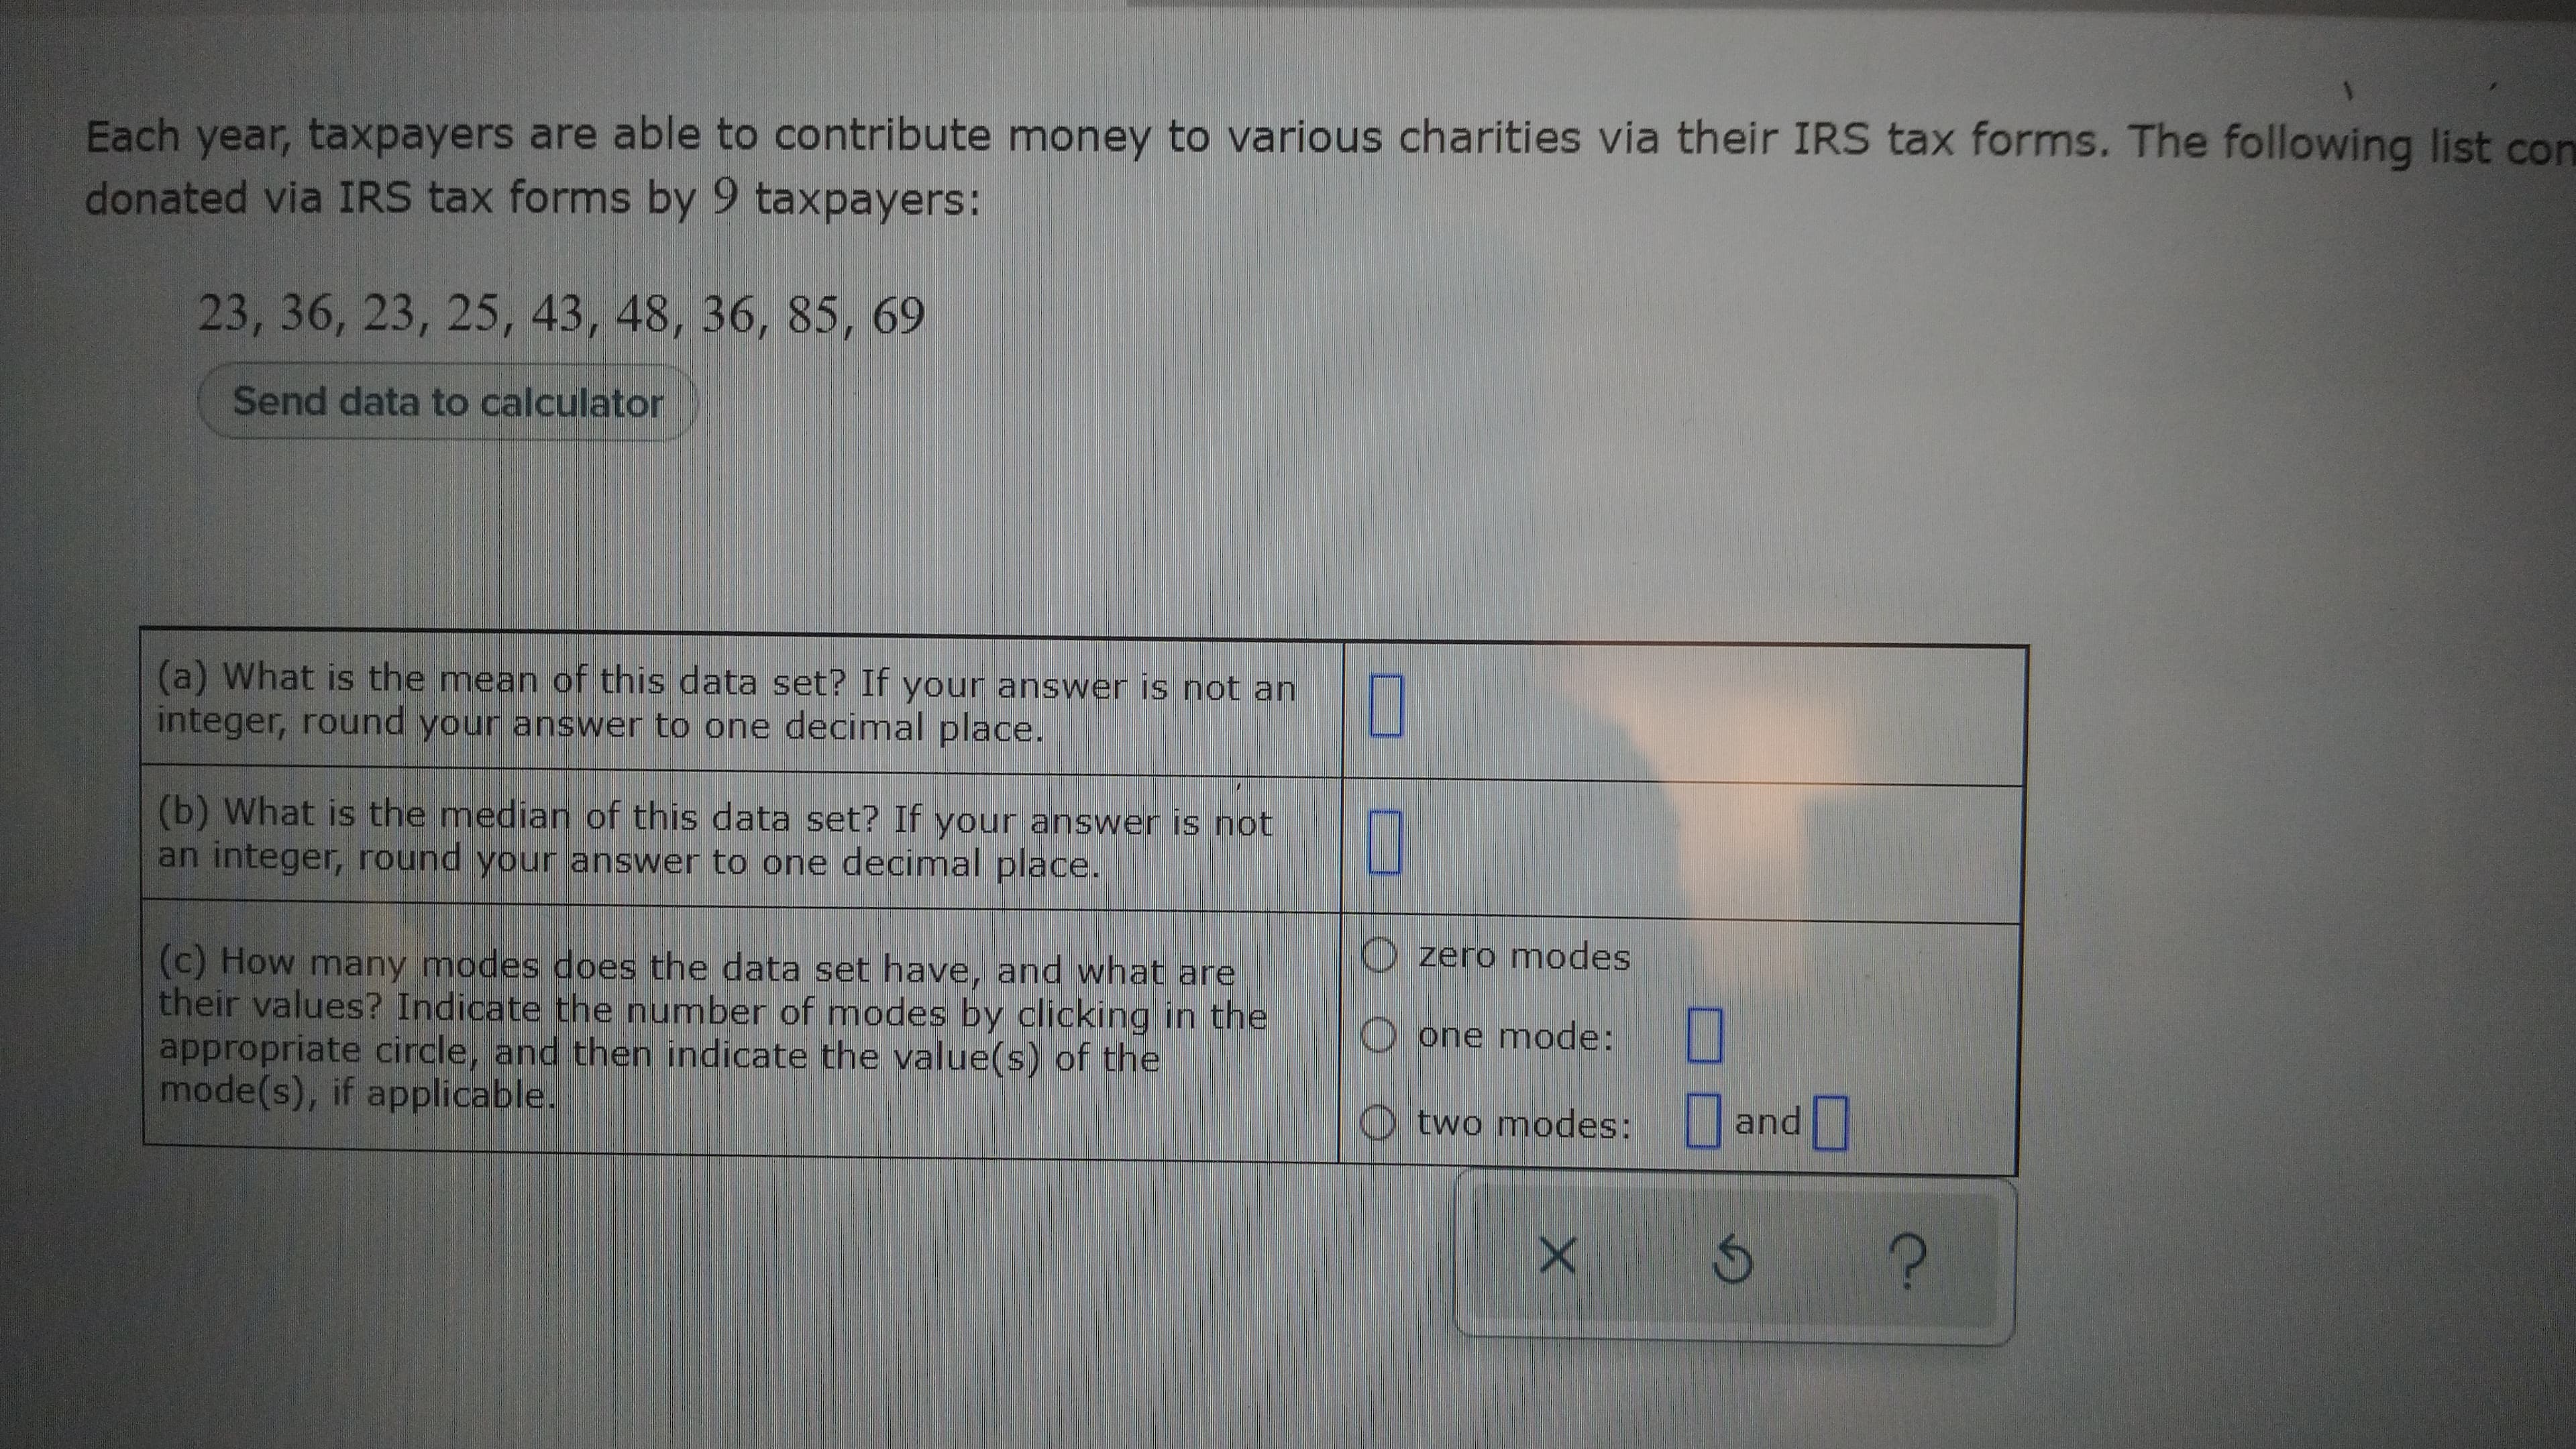 Each year, taxpayers are able to contribute money to various charities via their IRS tax forms. The following list con
donated via IRS tax forms by 9 taxpayers:
23, 36, 23, 25, 43, 48, 36, 85, 69
Send data to calculator
(a) What is the mean of this data set? If your answer is not an
integer, round your answer to one decimal place.
(b) What is the median of this data set? If your answer is not
an integer, round your answer to one decimal place.
O
(c) How many modes does the data set have, and what are
their values? Indicate the number of modes by clicking in the
appropriate circle, and then indicate the value(s) of the
mode(s), if applicable.
O zero modes
one mode:
O two modes: and
?.
